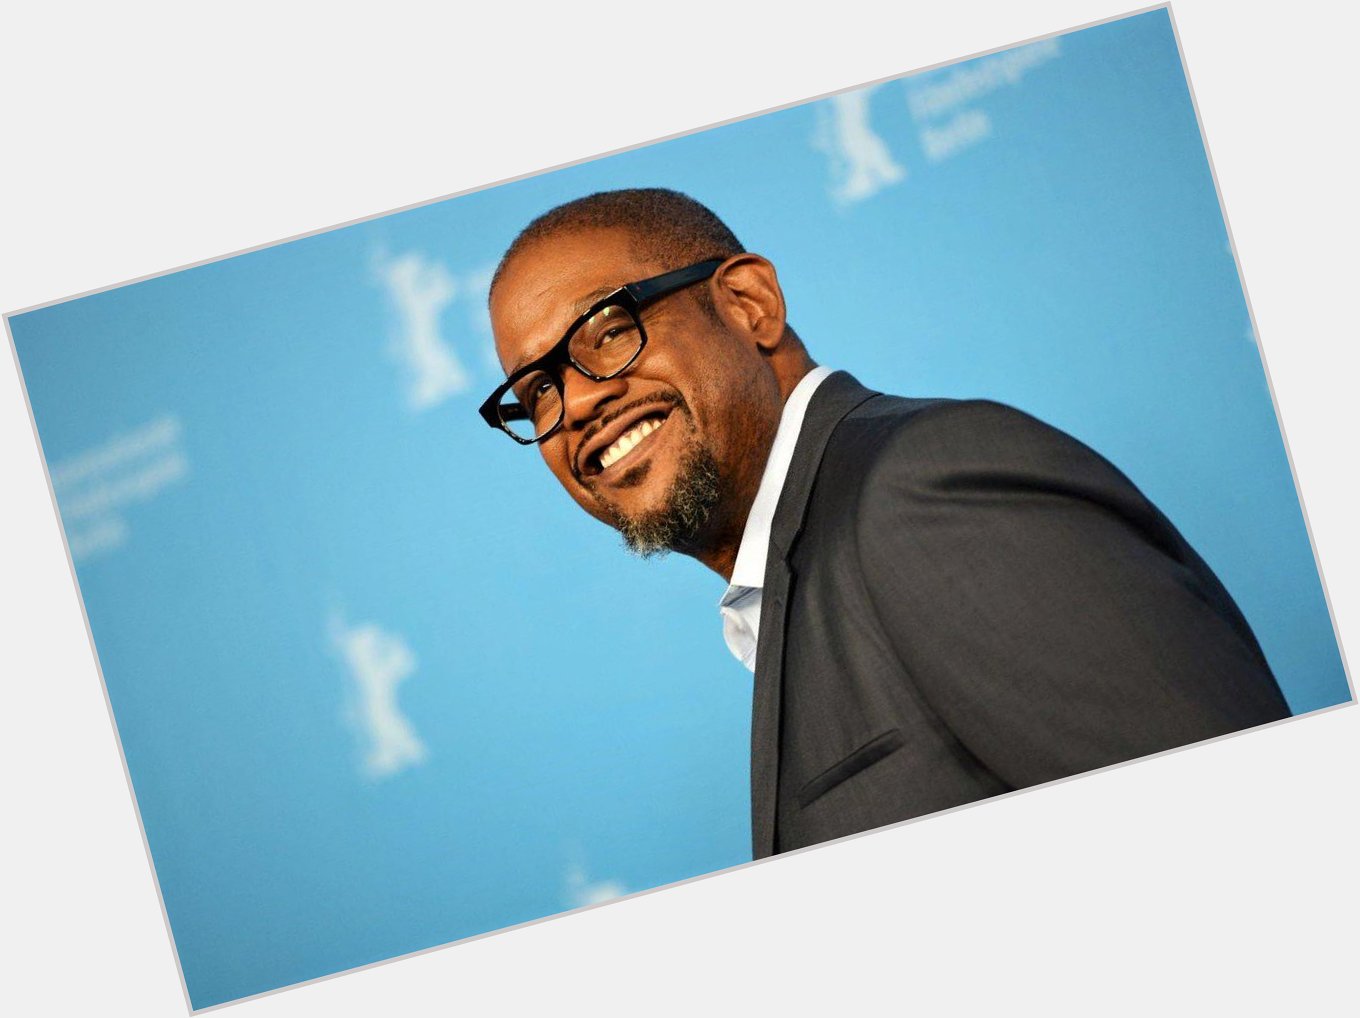 Happy birthday to Forest Whitaker! 